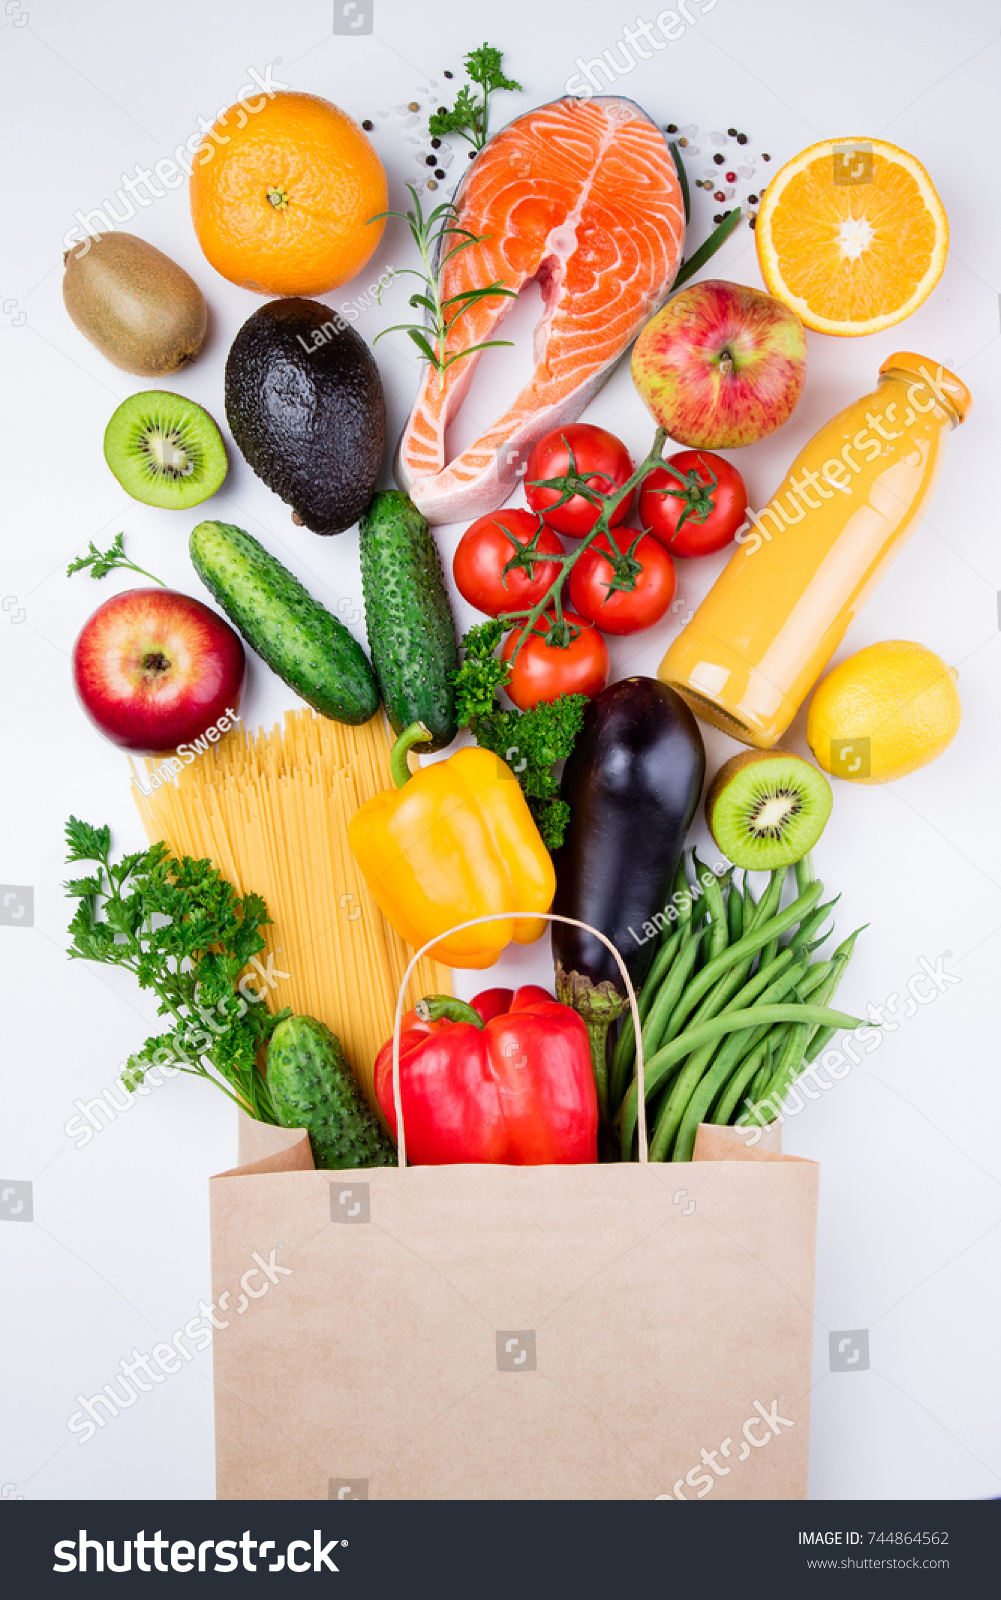 Healthy food background. Healthy food in full paper bag of different products fish, vegetables and fruits on white background. Top view #744864562